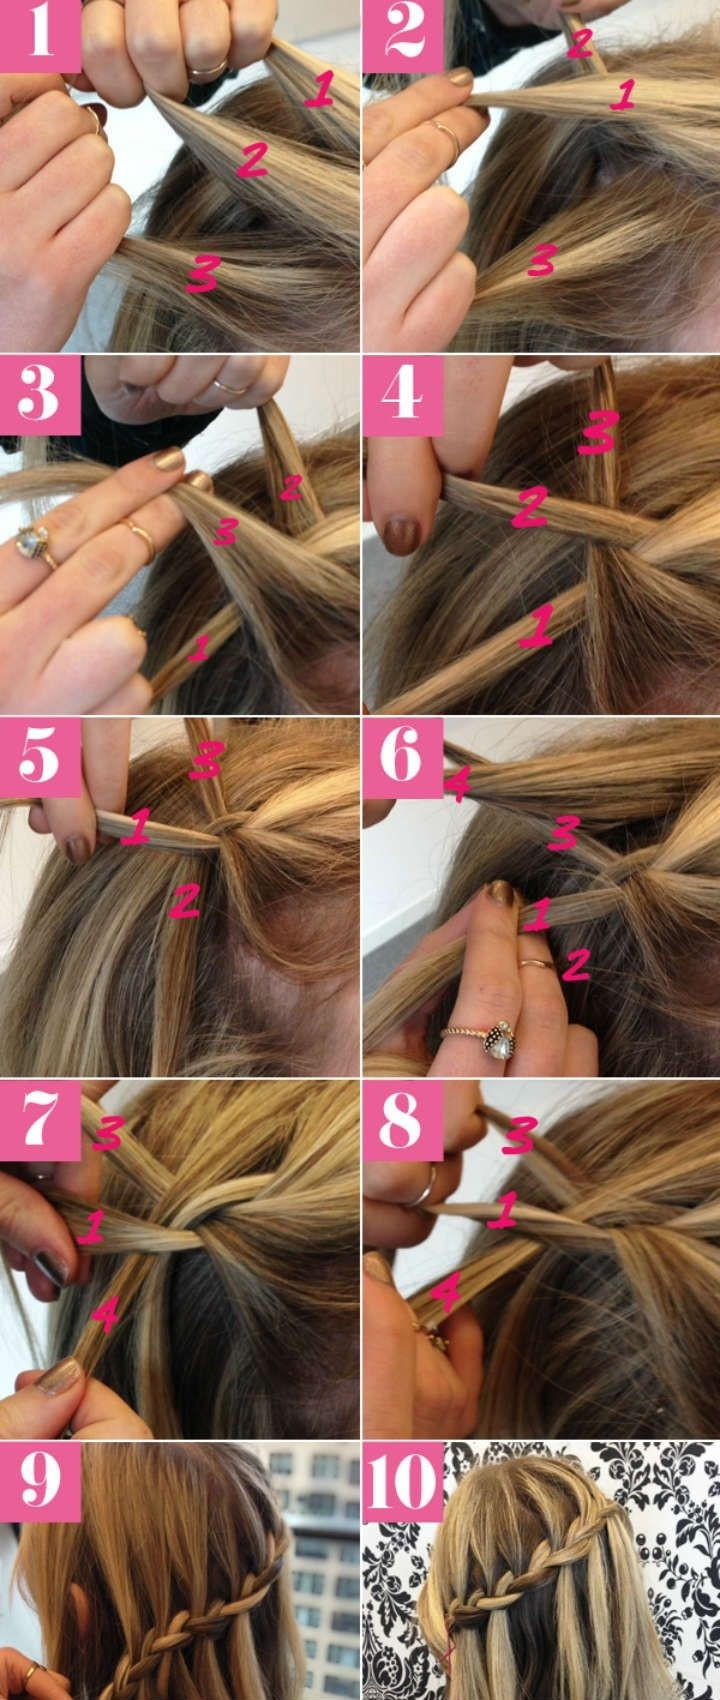 Cool Hairstyles Step By Step
 10 Best Waterfall Braids Hairstyle Ideas for Long Hair